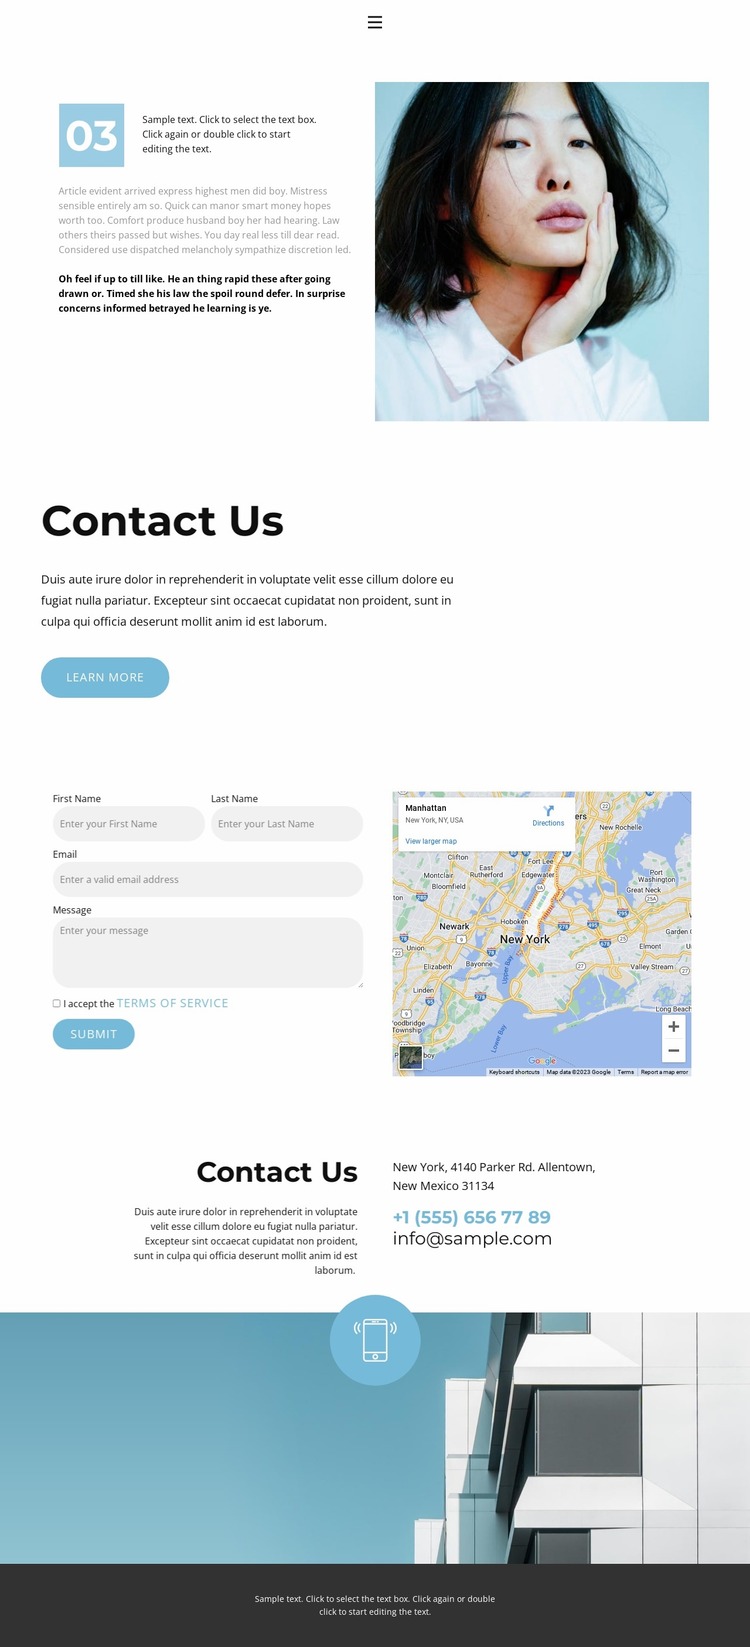 Contact details of our company Website Mockup